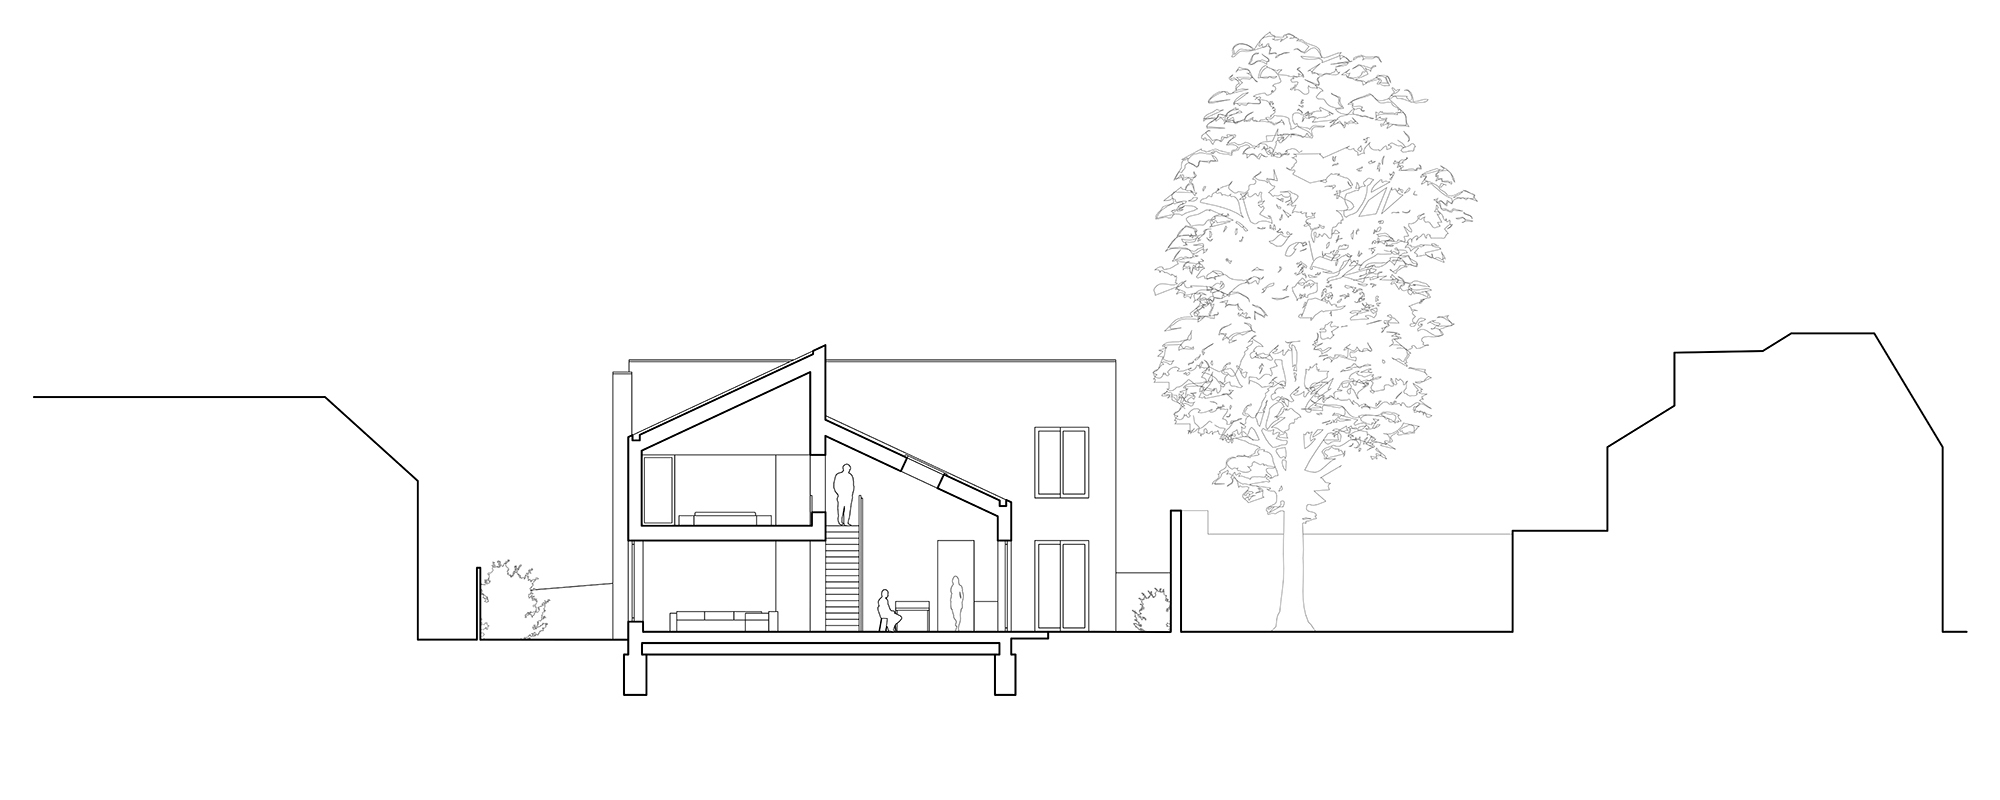 Erbar Mattes Architects Wimbledon custom new build contemporary modern house conservation area section drawing